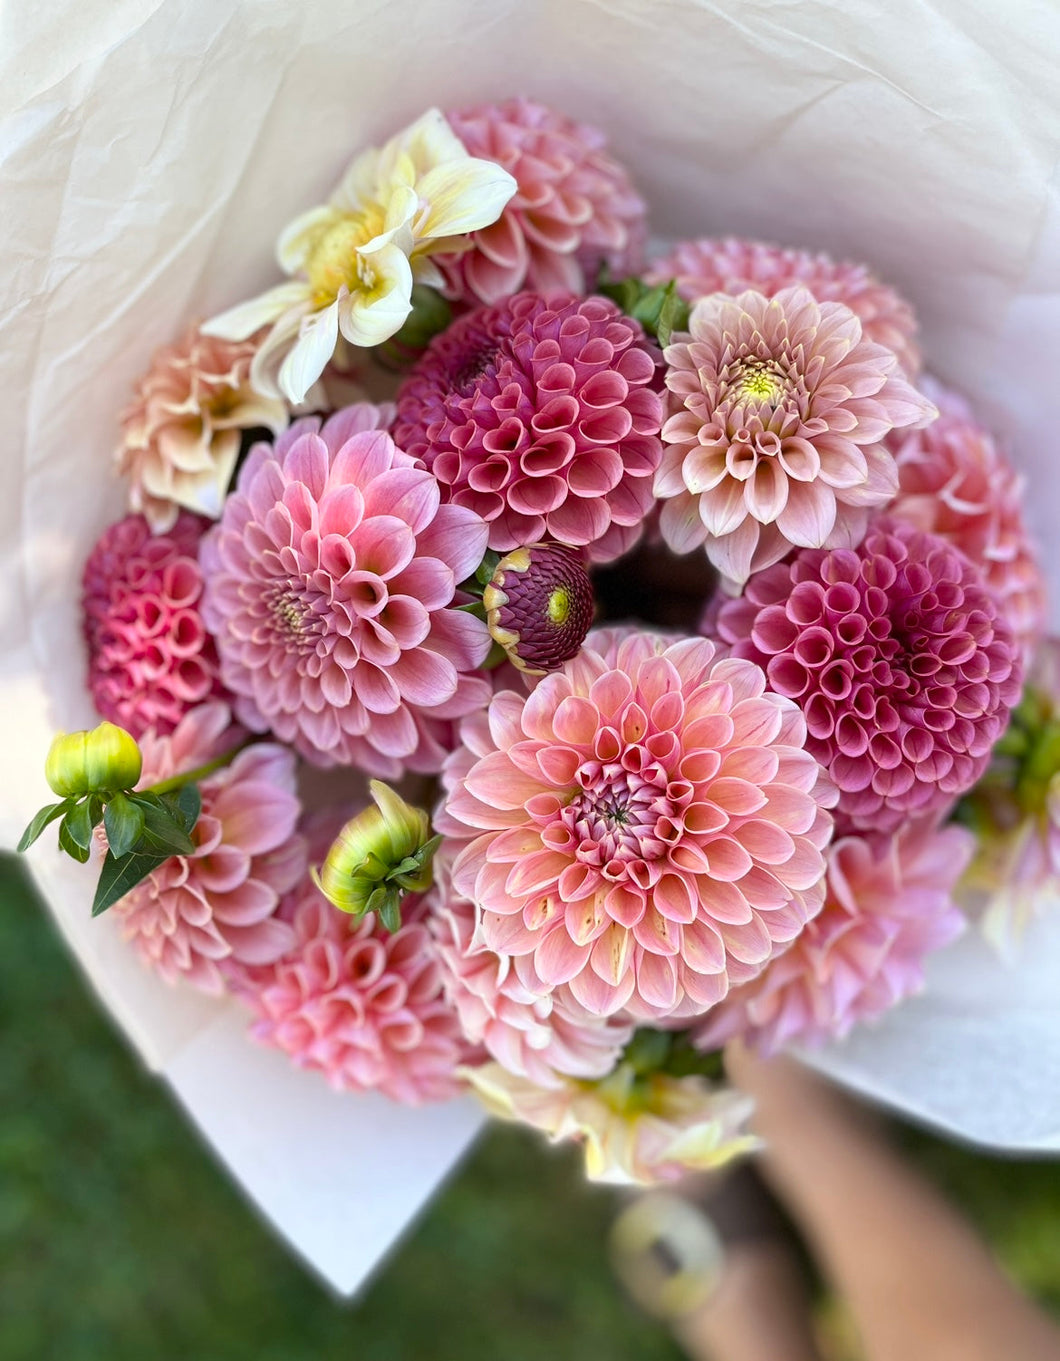 September Dahlia Subscription - Three Weeks of Dahlias in September (Delivery to Abbotsford or Aldergrove)